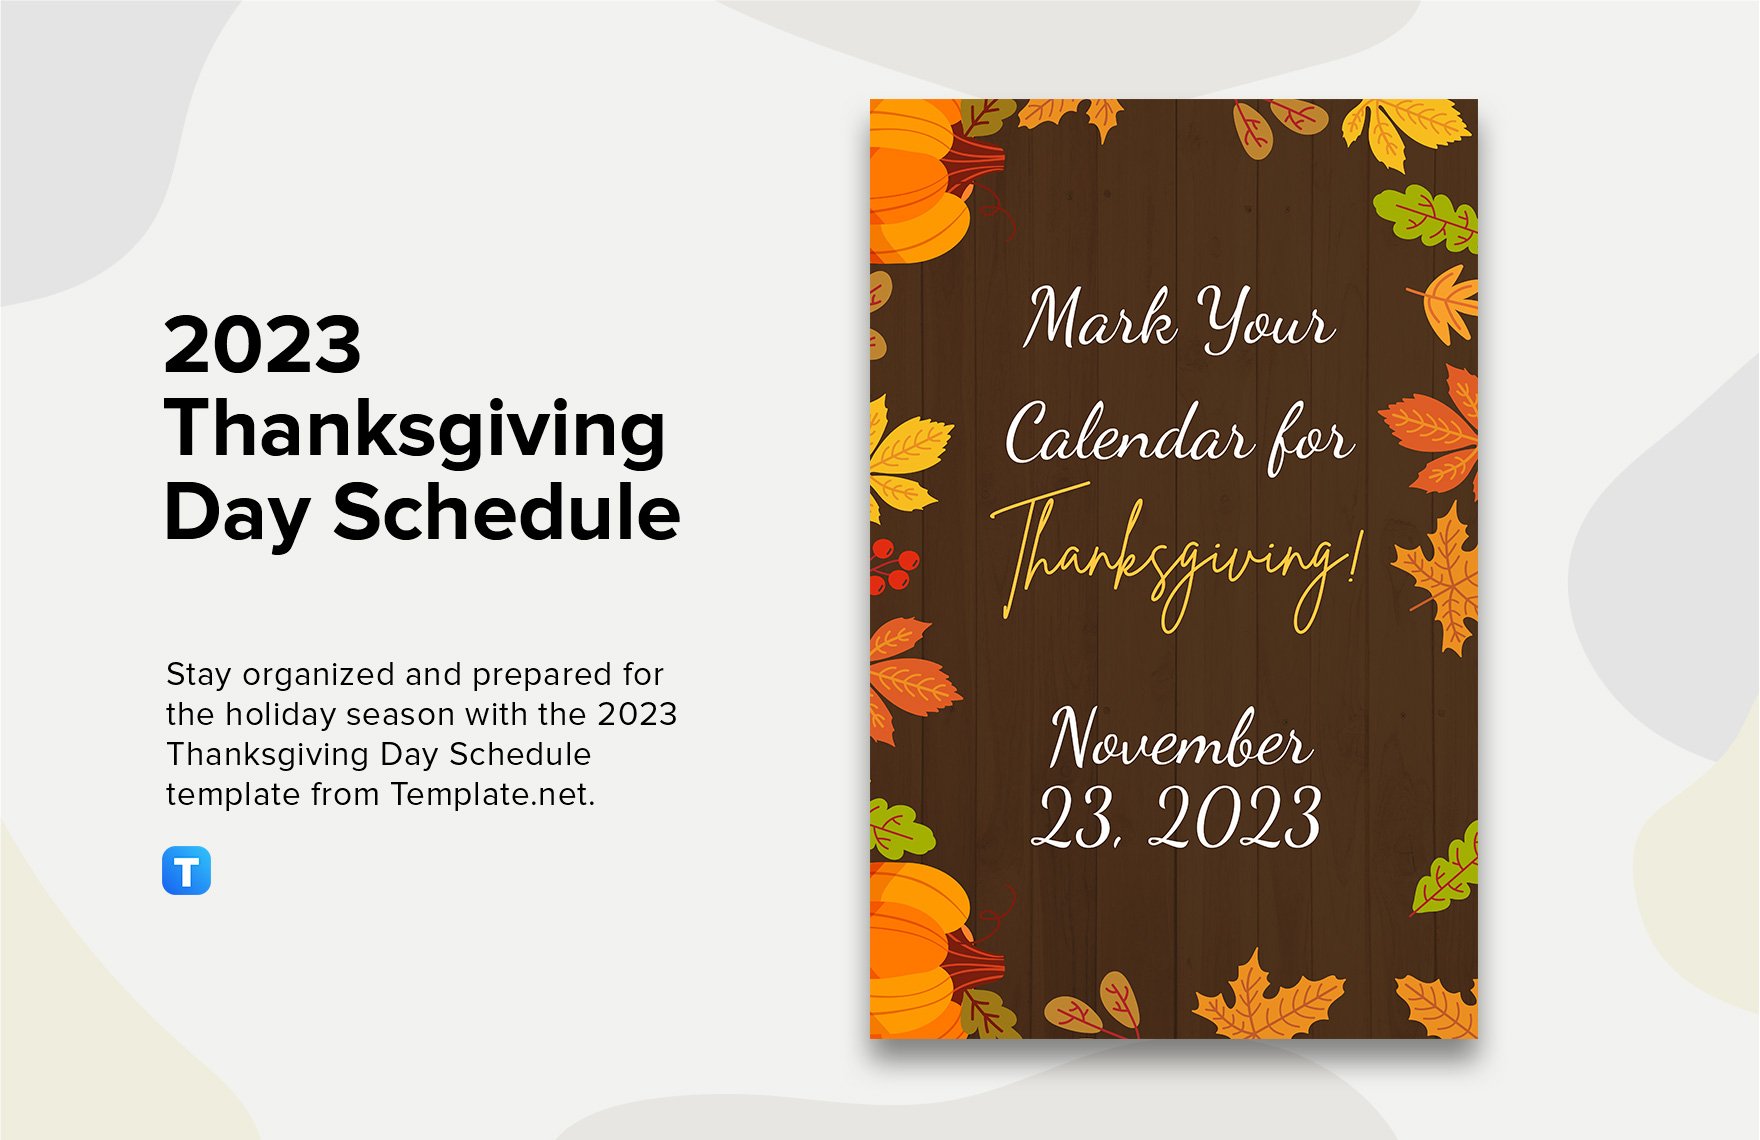 2023 Thanksgiving Day Schedule Template